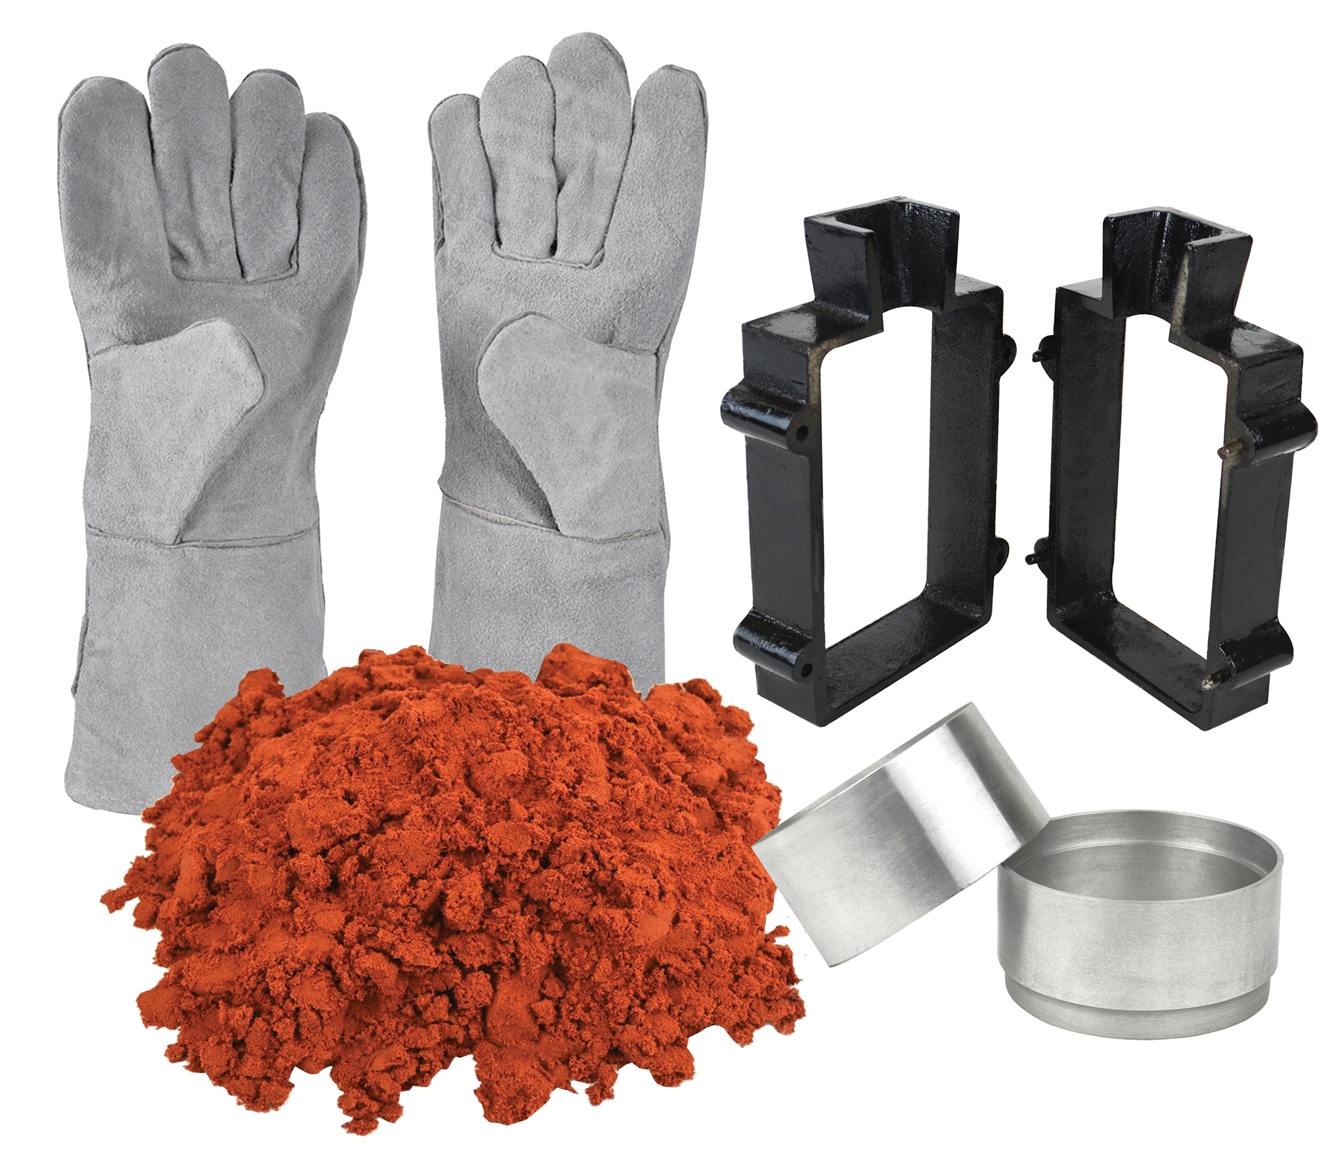 Sand Casting Set with 10 Lbs of Petrobond Sand Casting Clay, 100 MM Mold  Frame, Cast Iron Flask, & Heat-Resistant Gloves, KIT-0143